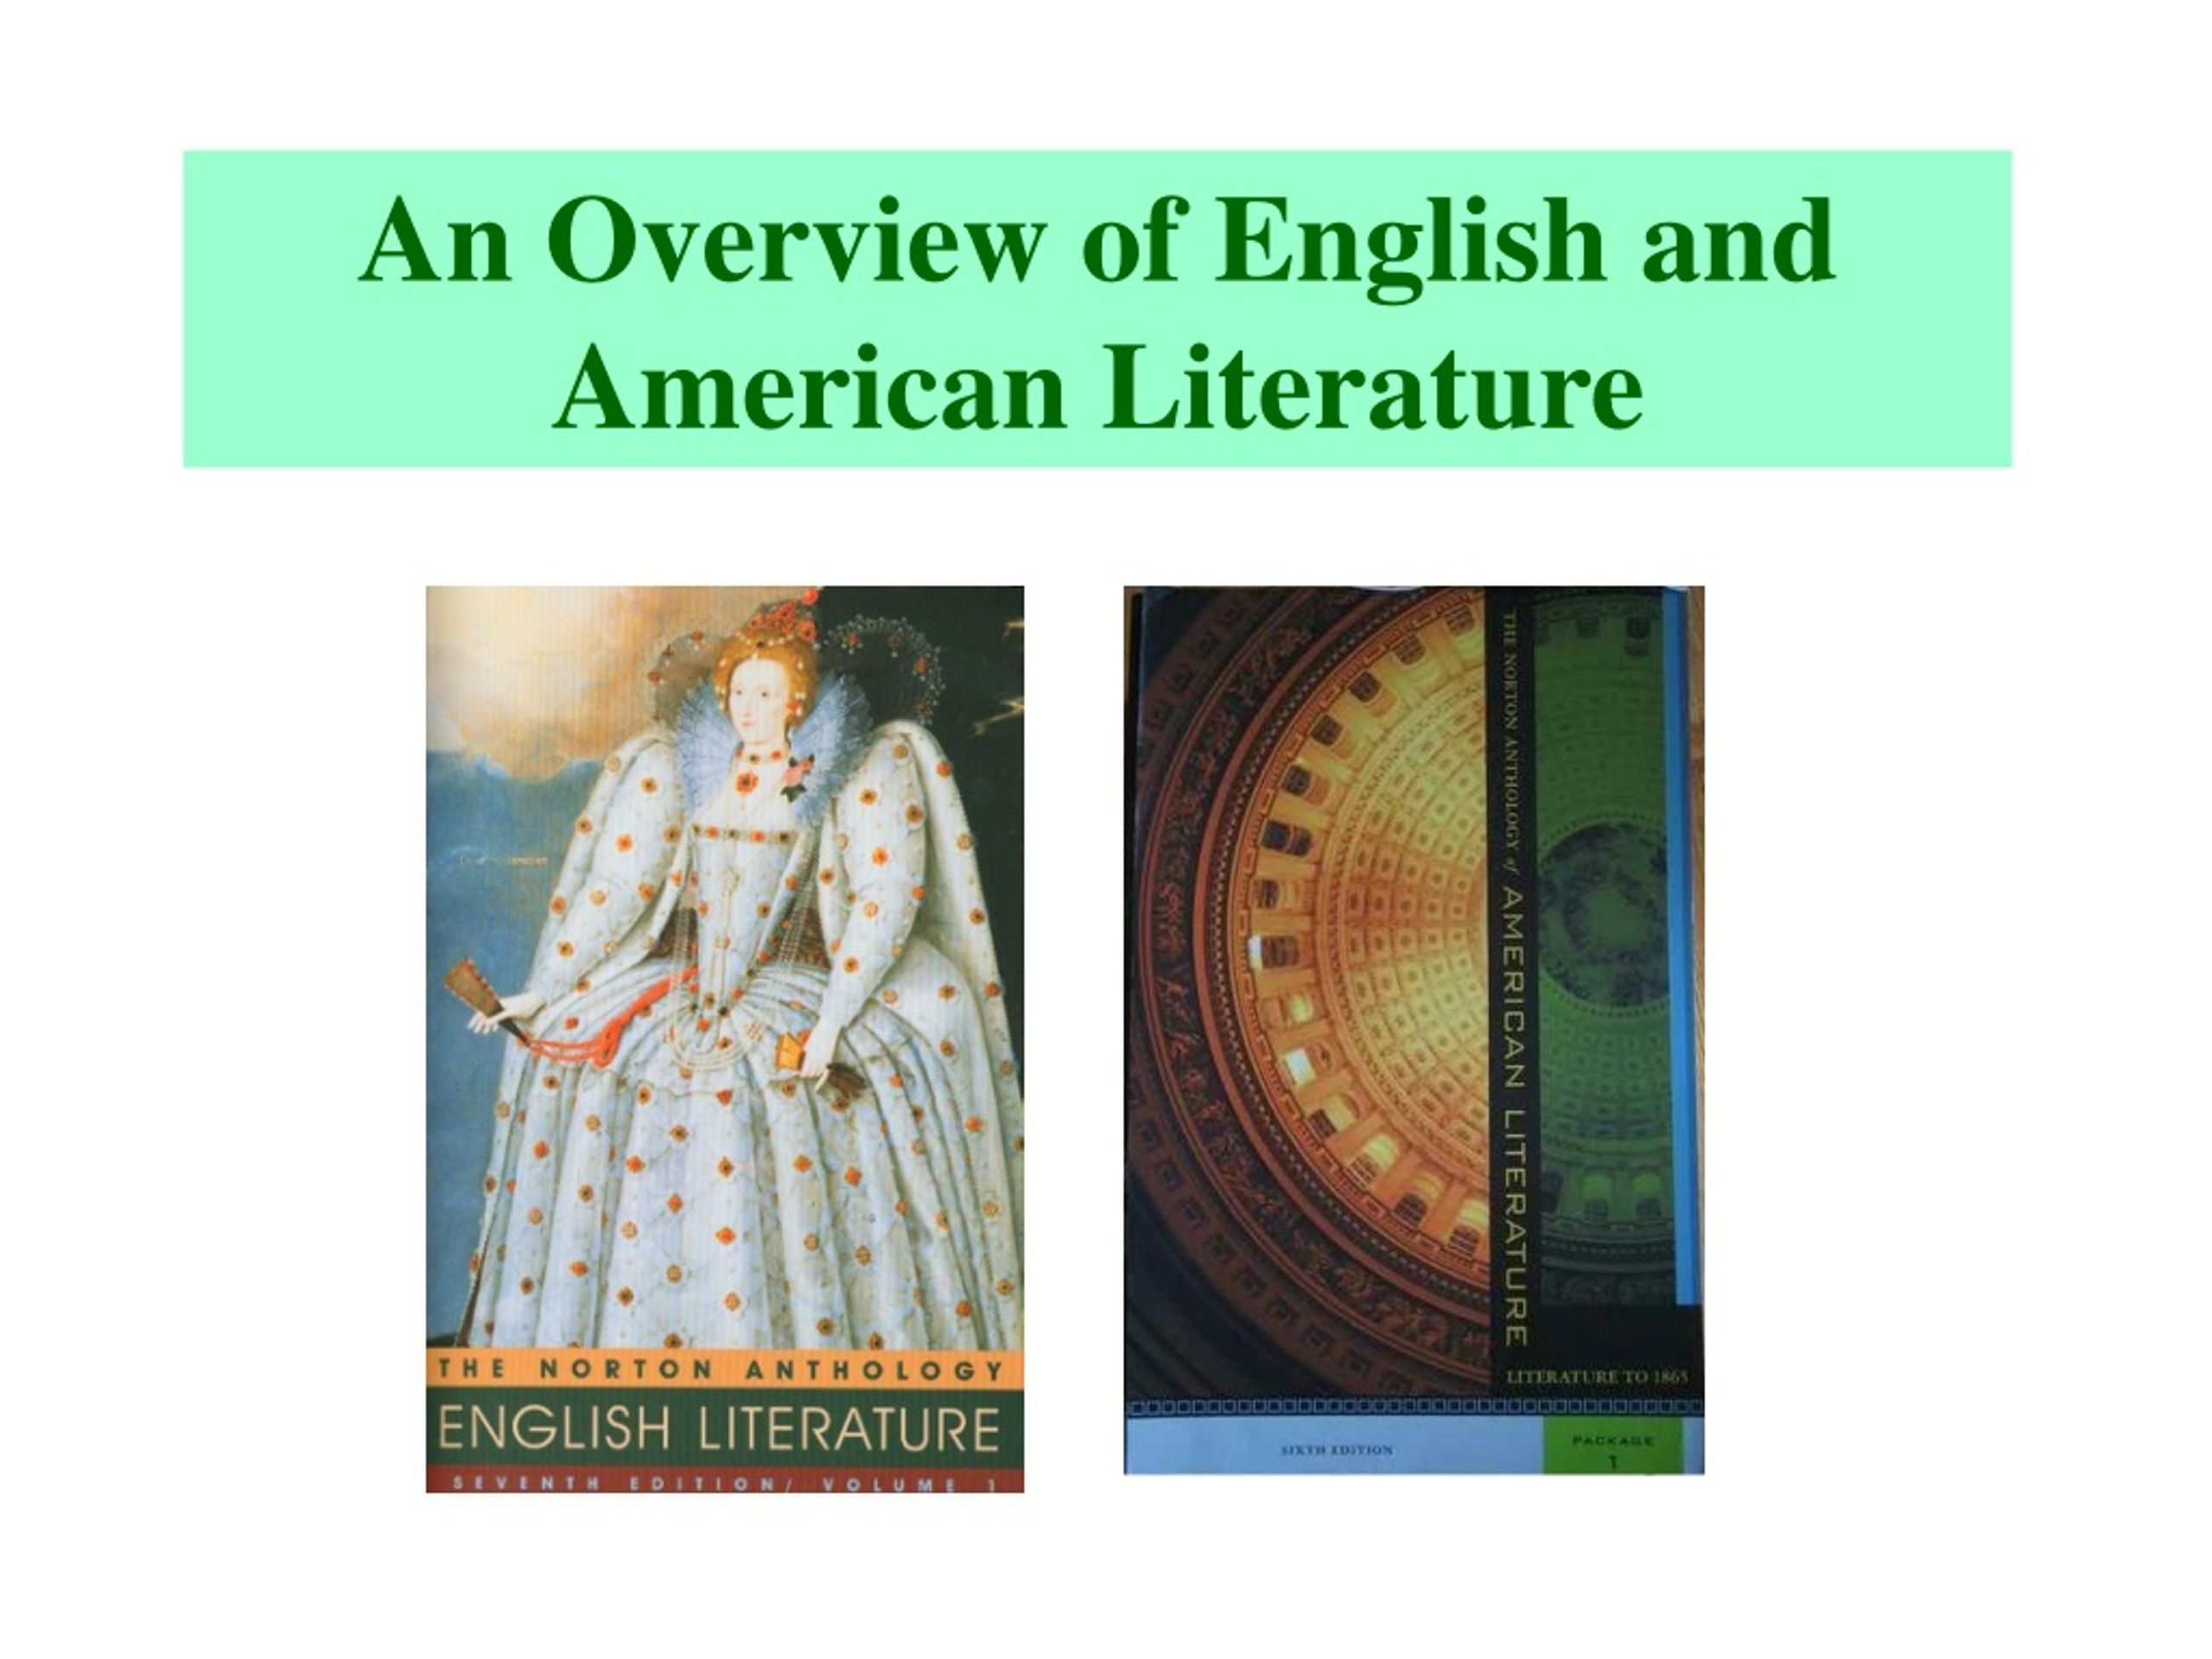 Ppt An Overview Of English And American Literature Powerpoint Presentation Id9256204 2125